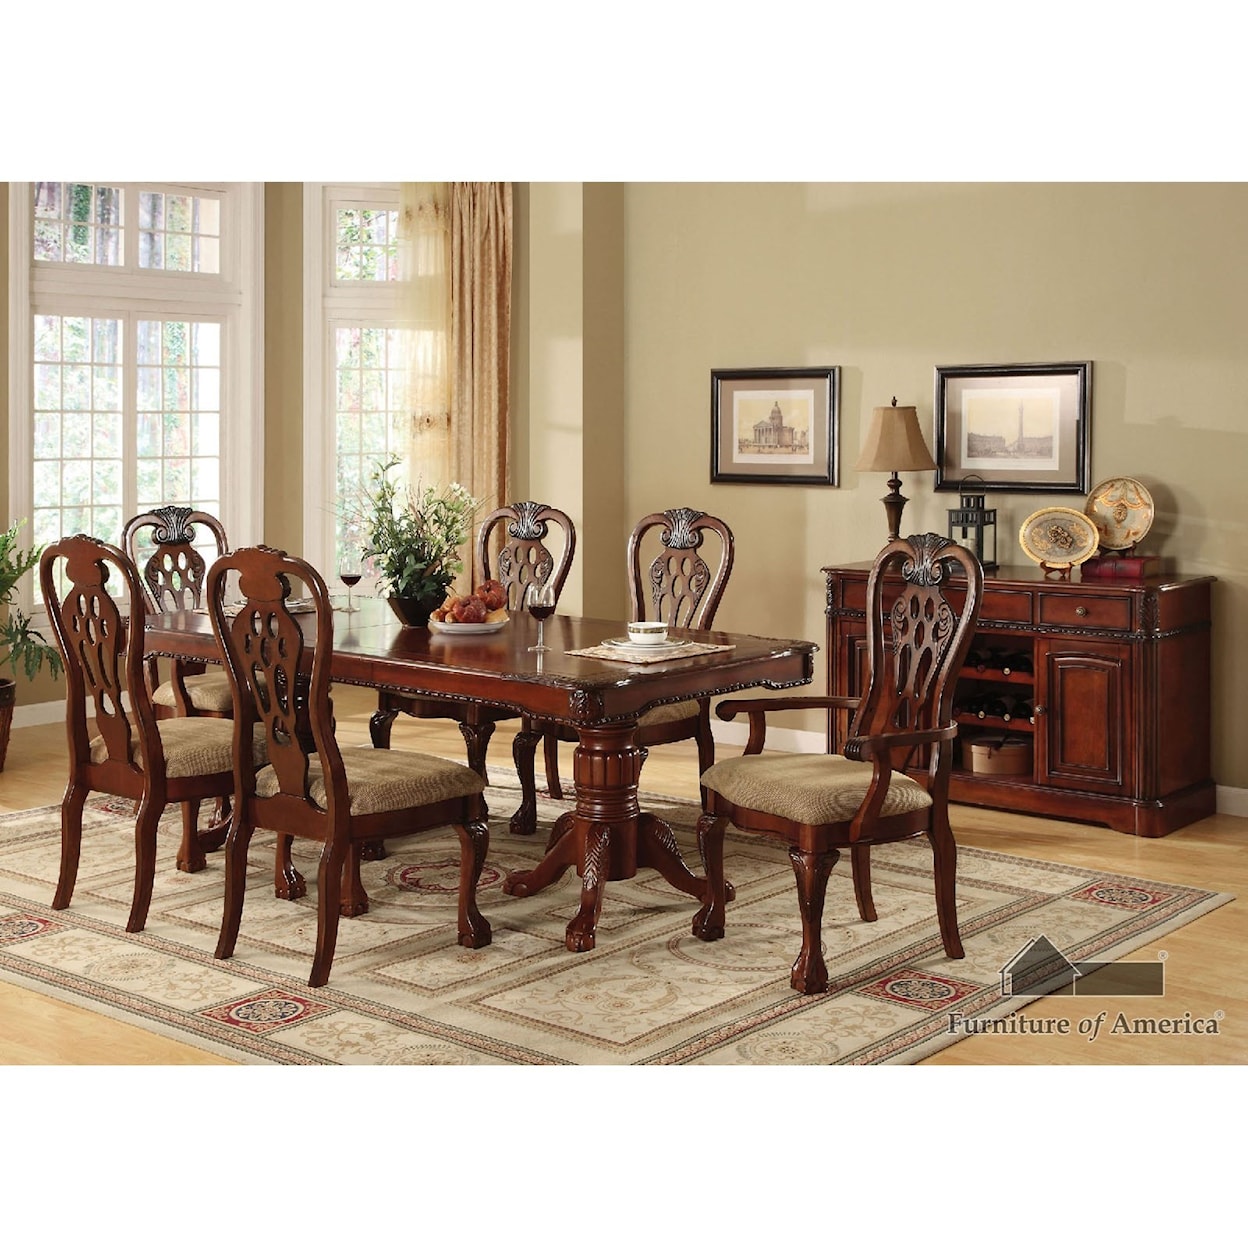 Furniture of America Georgetown Formal Dining Table w/ Double Pedestals